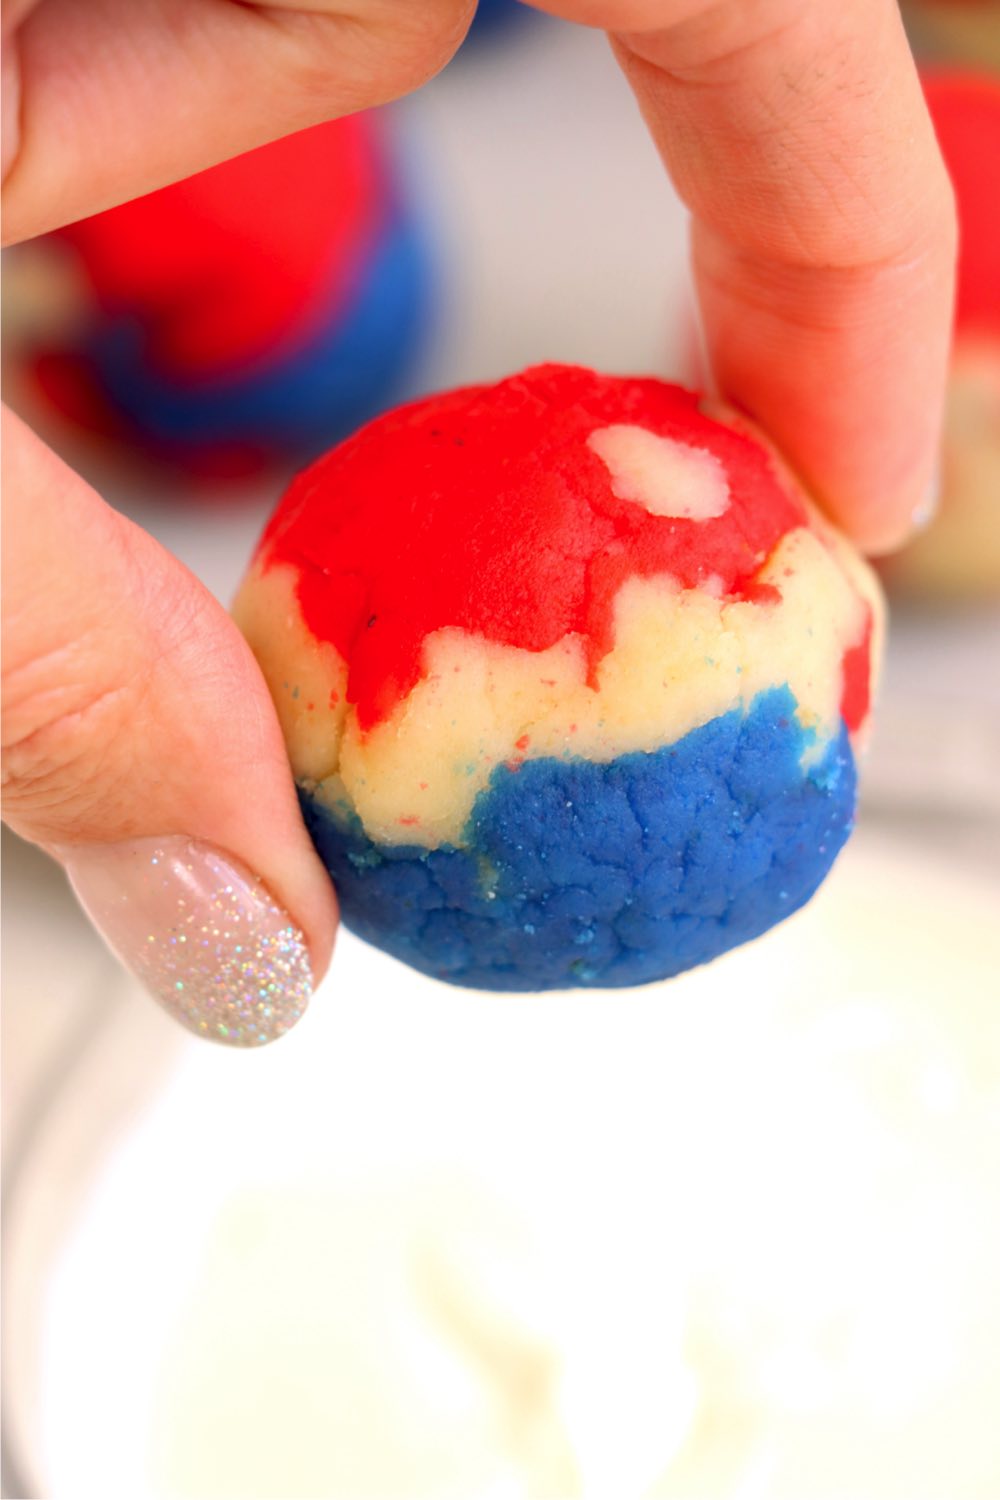 Fingers holding a red, white and blue cake ball.